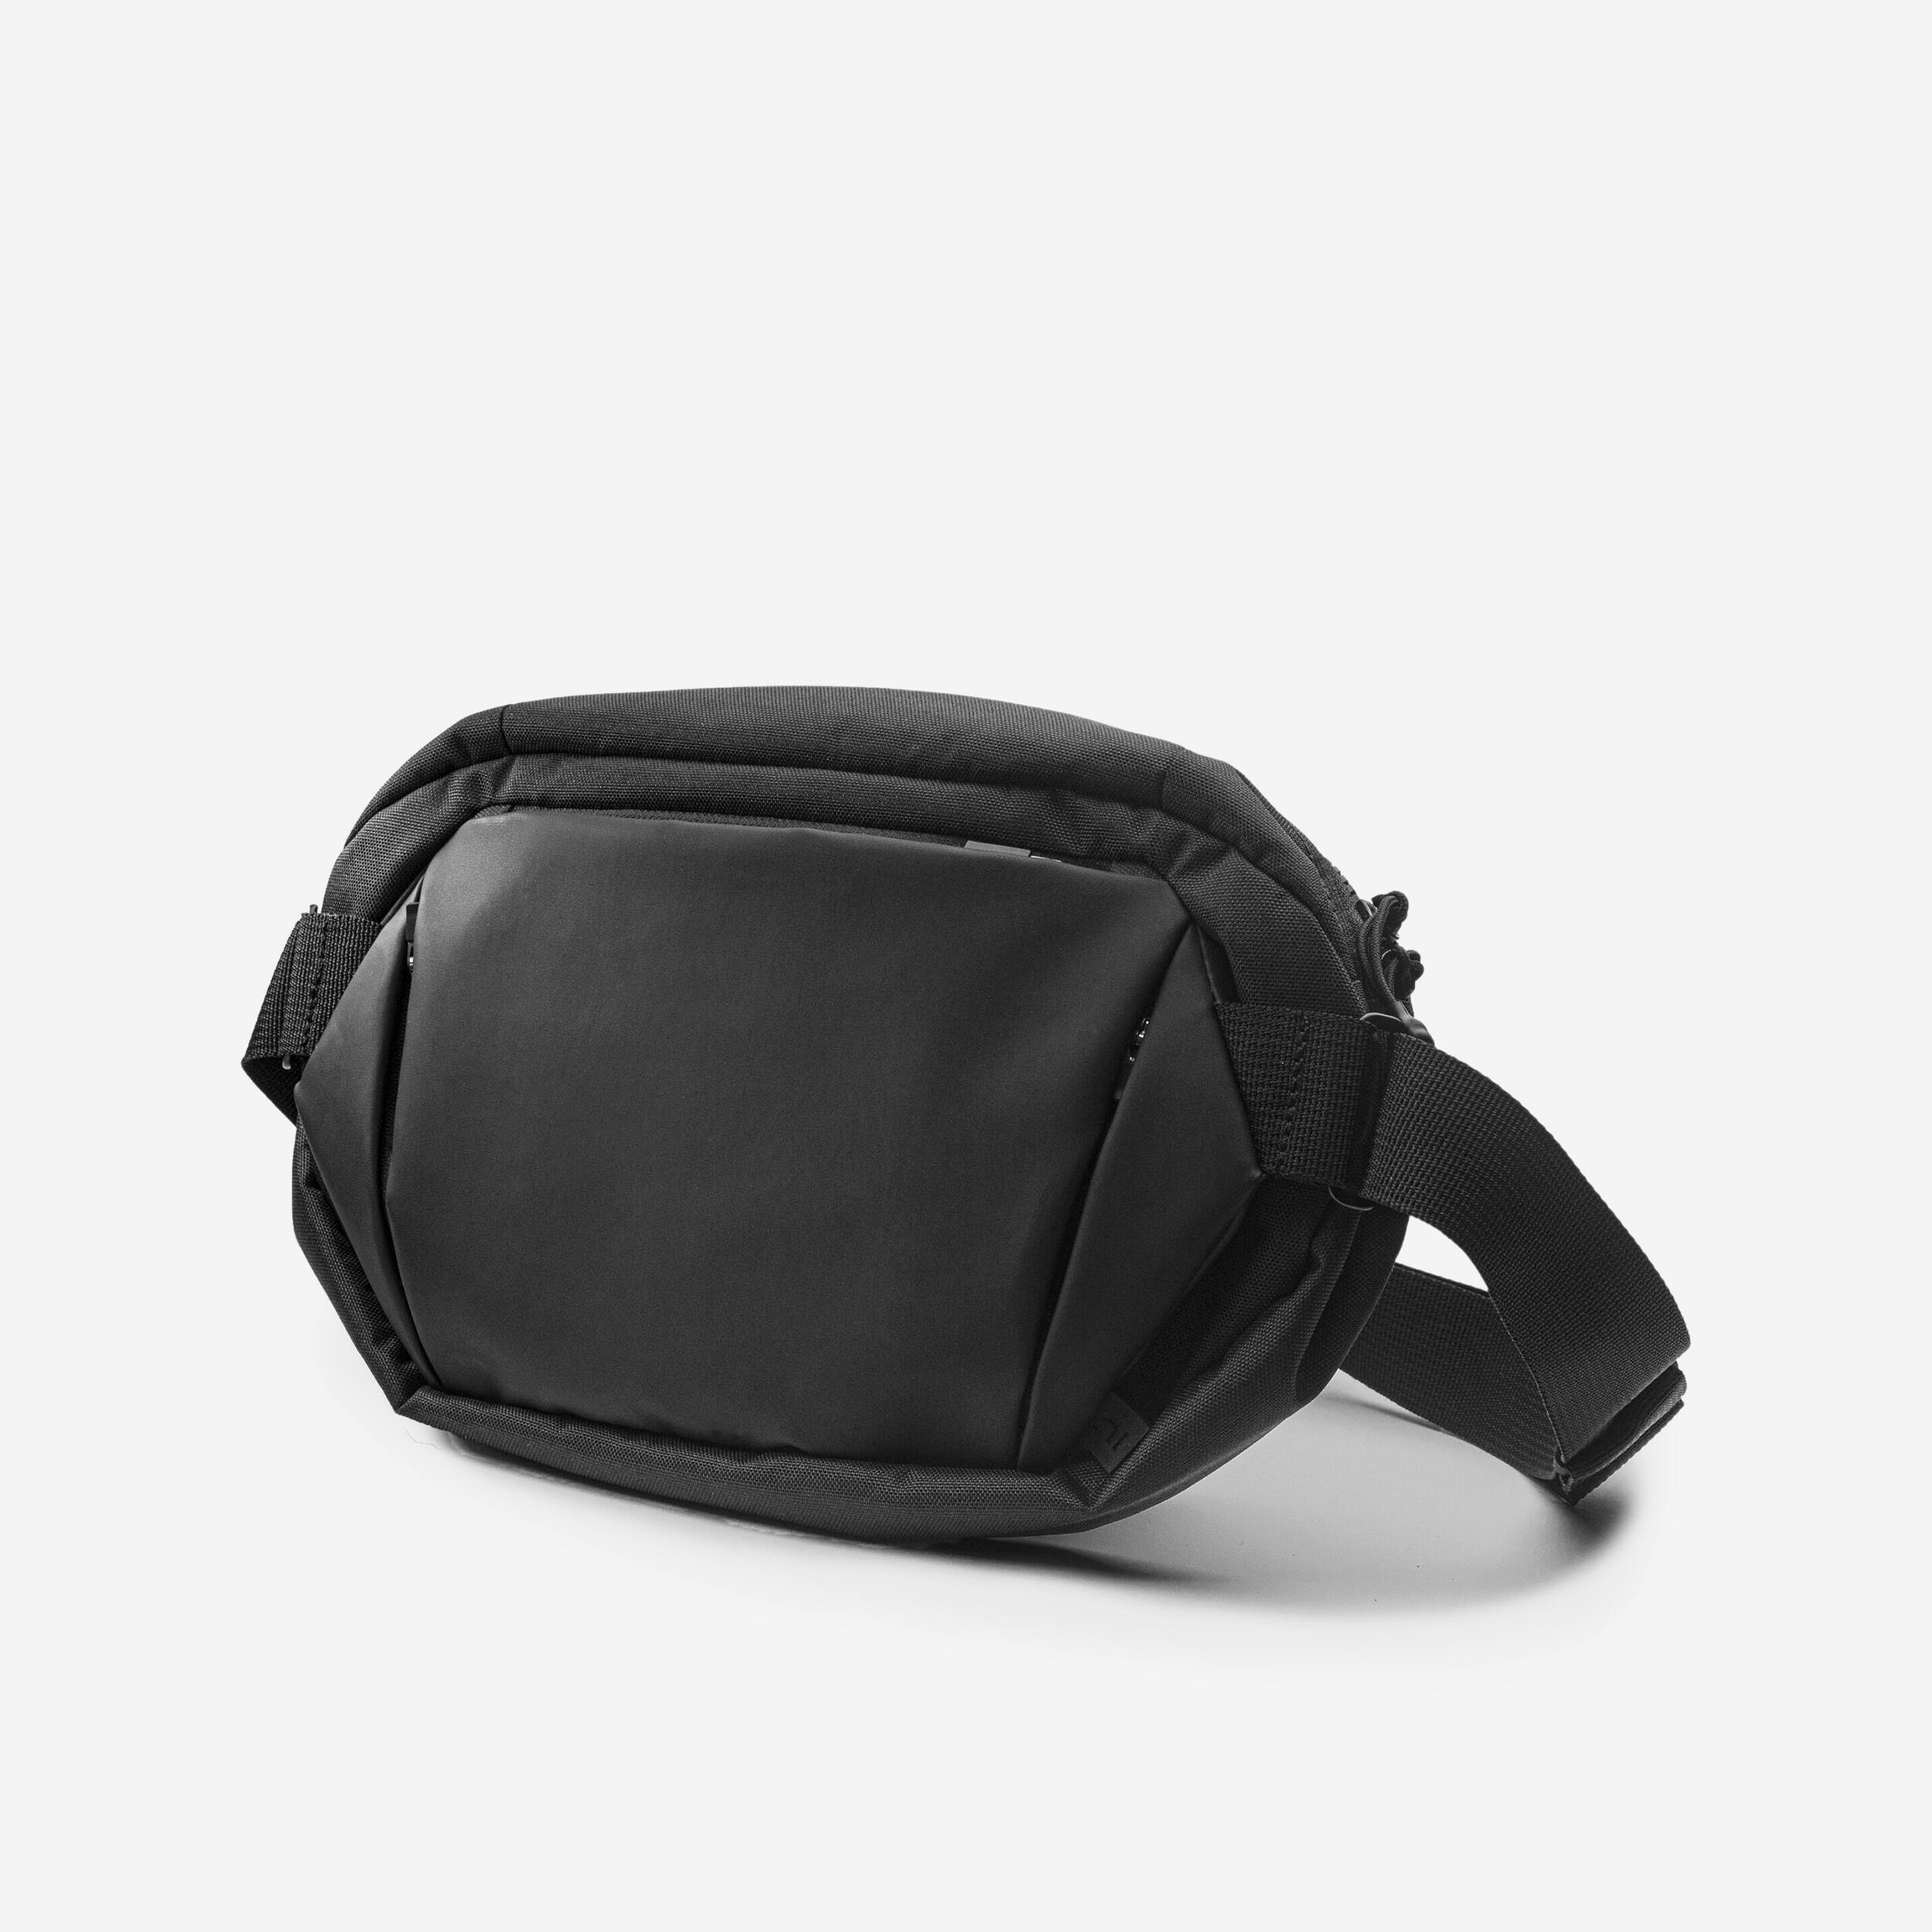 NewFeel by Decathlon Crossbody/Shoulder/Waist Bag for Outdoor  Tracking/Hiking - Unisex, Men's Fashion, Bags, Sling Bags on Carousell